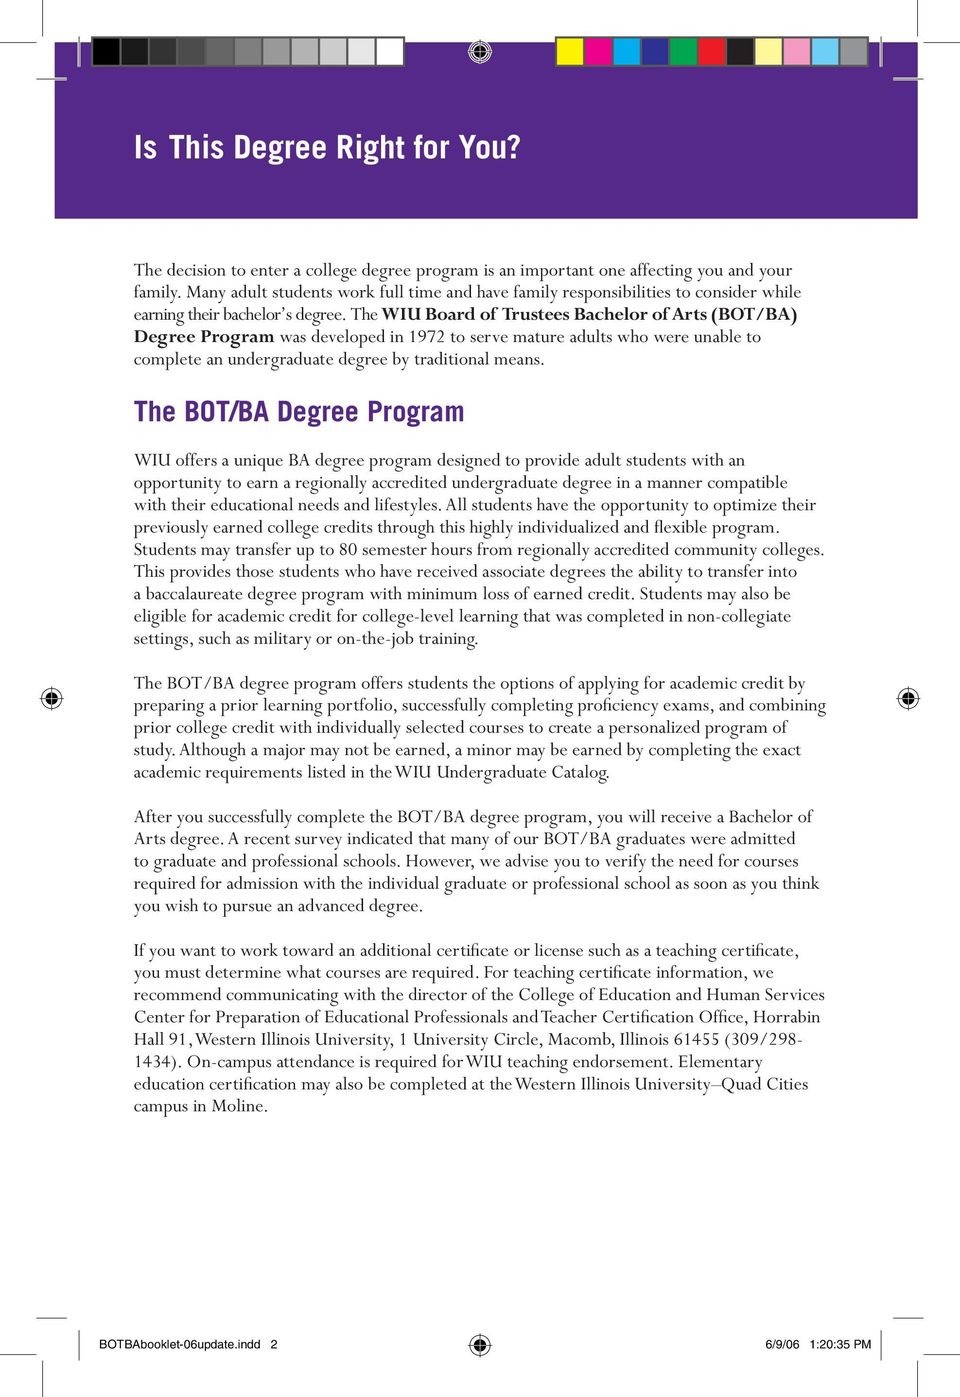 The WIU Board of Trustees Bachelor of Arts (BOT/BA) Degree Program was developed in 1972 to serve mature adults who were unable to complete an undergraduate degree by traditional means.